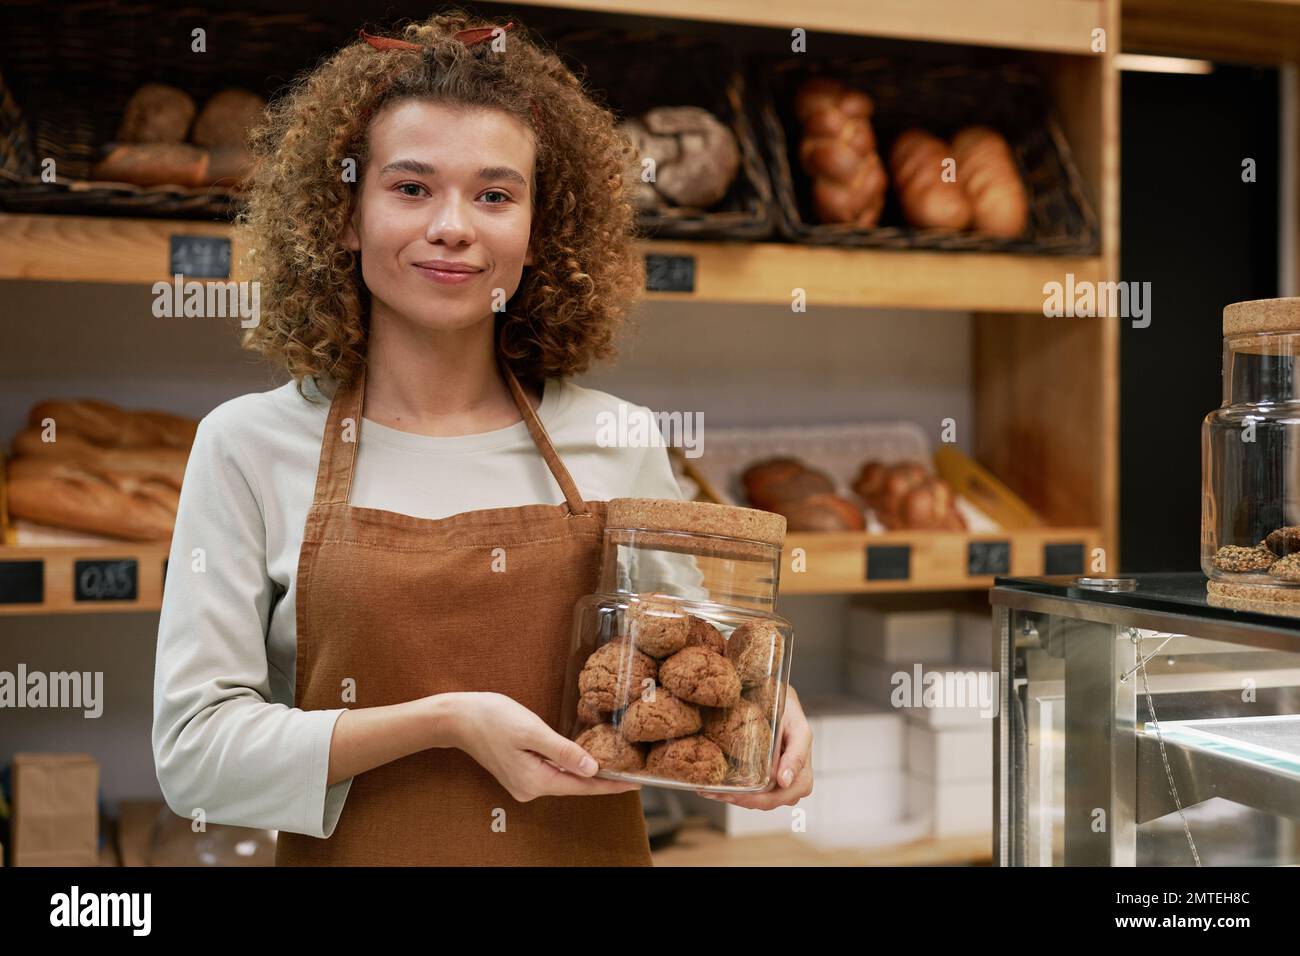 Smiling bakery owner holding jar of gluten free cookies Stock Photo